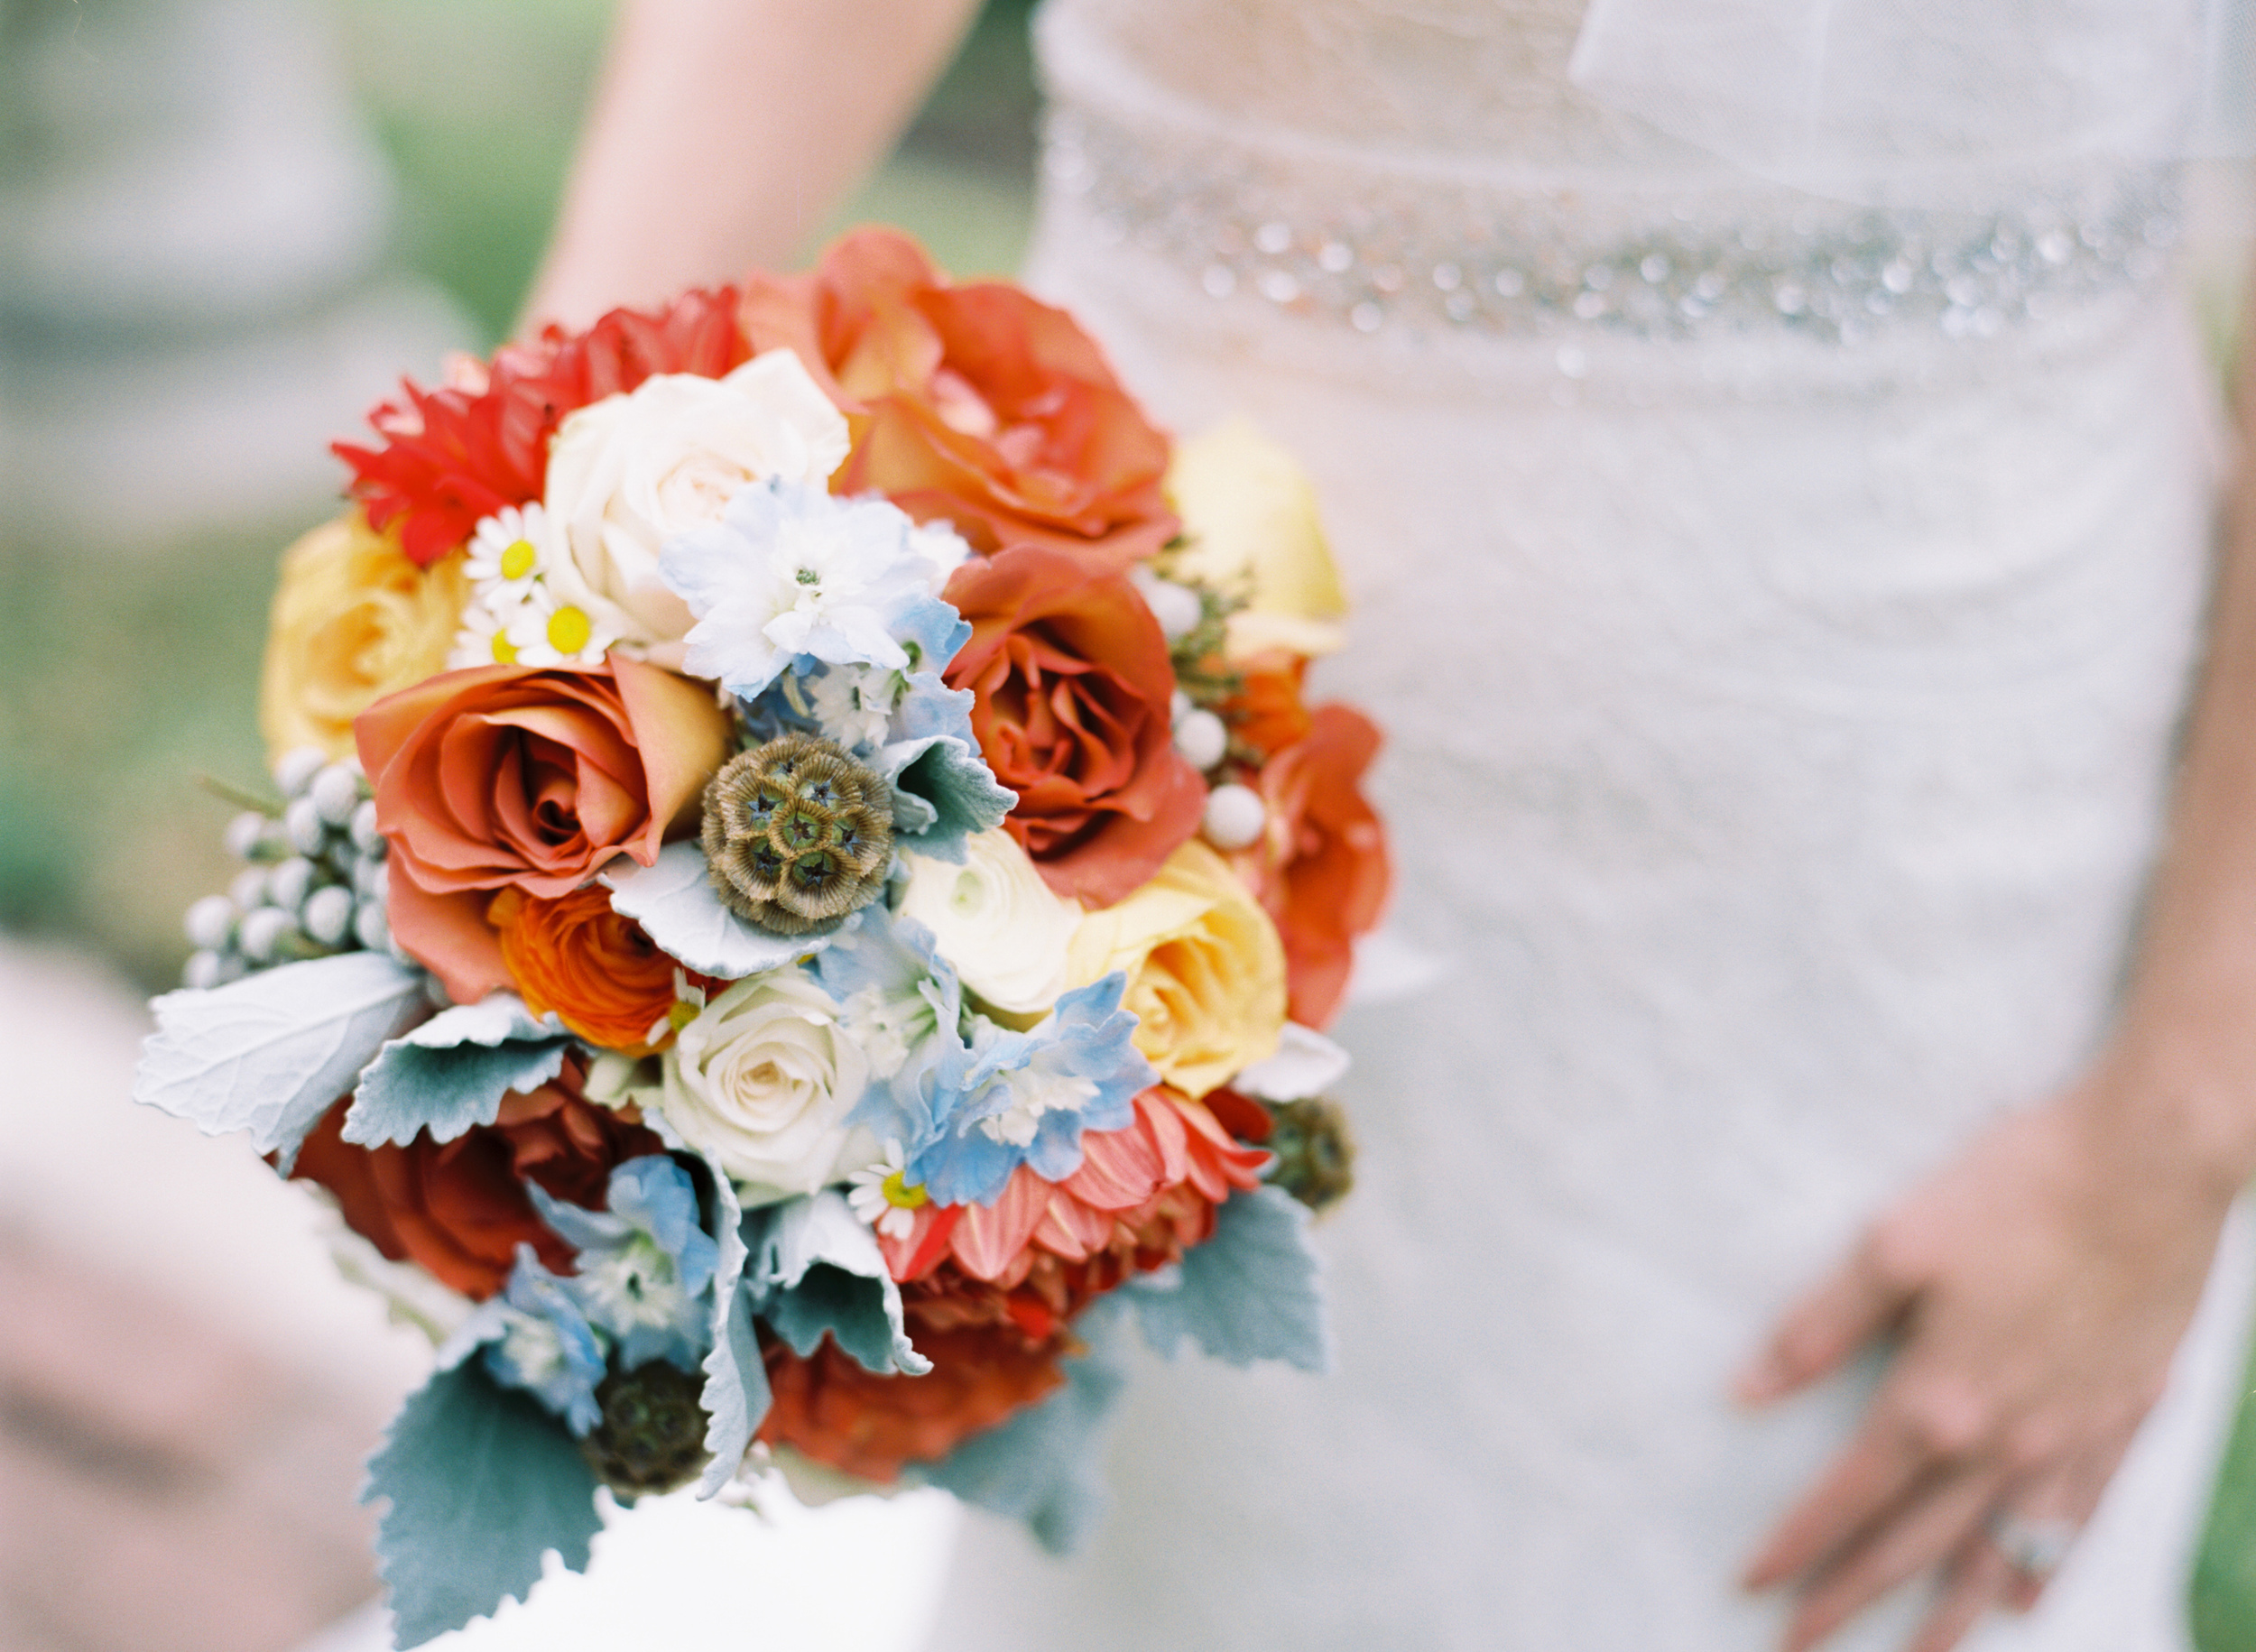 Houston Wedding // Flowers by Rosemary & Finch Floral Design // Photos by Austin Gros